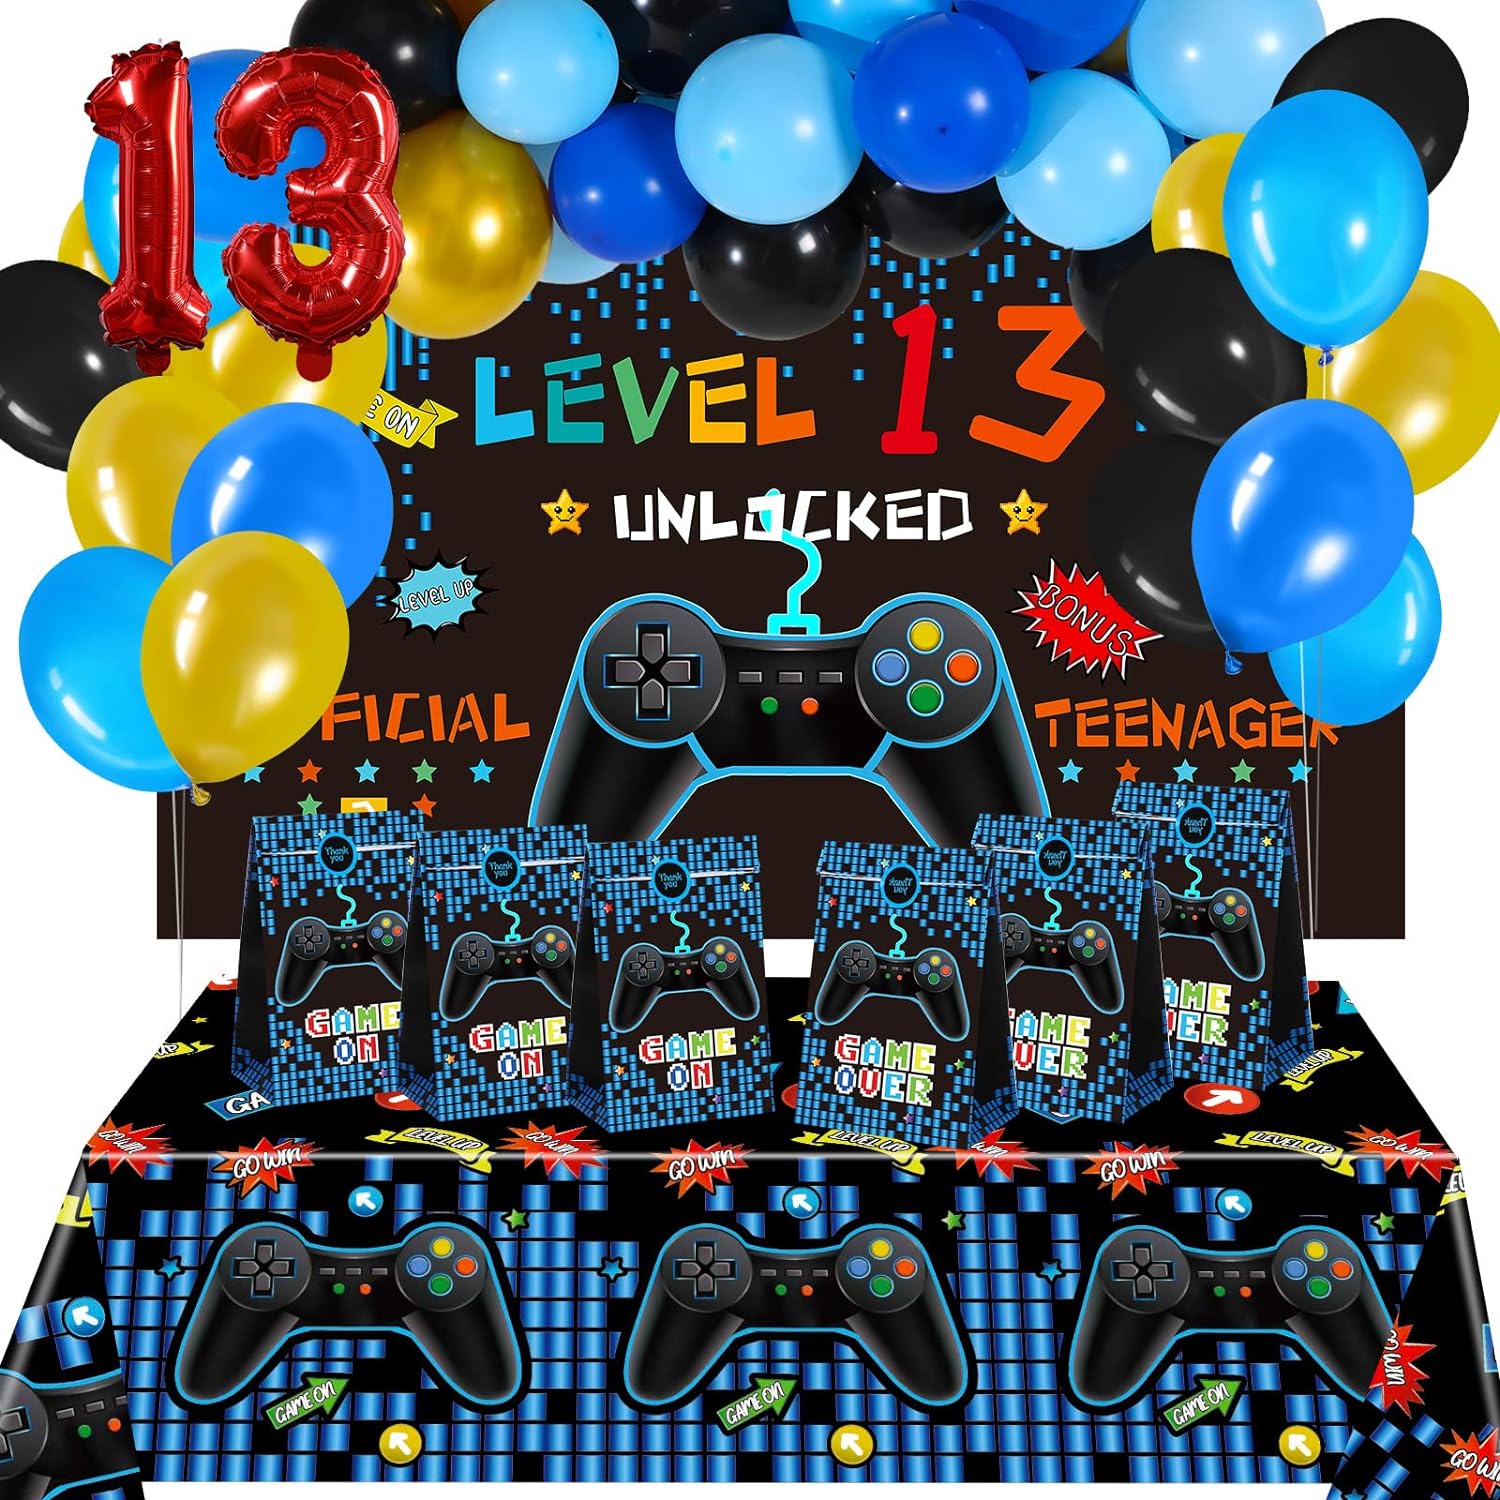 Great Choice Products 13Th Birthday Decorations For Boys Video Game Party Supplies 69 Pieces Level 13 Up Birthday Decoration, Video Game Backdrop T…